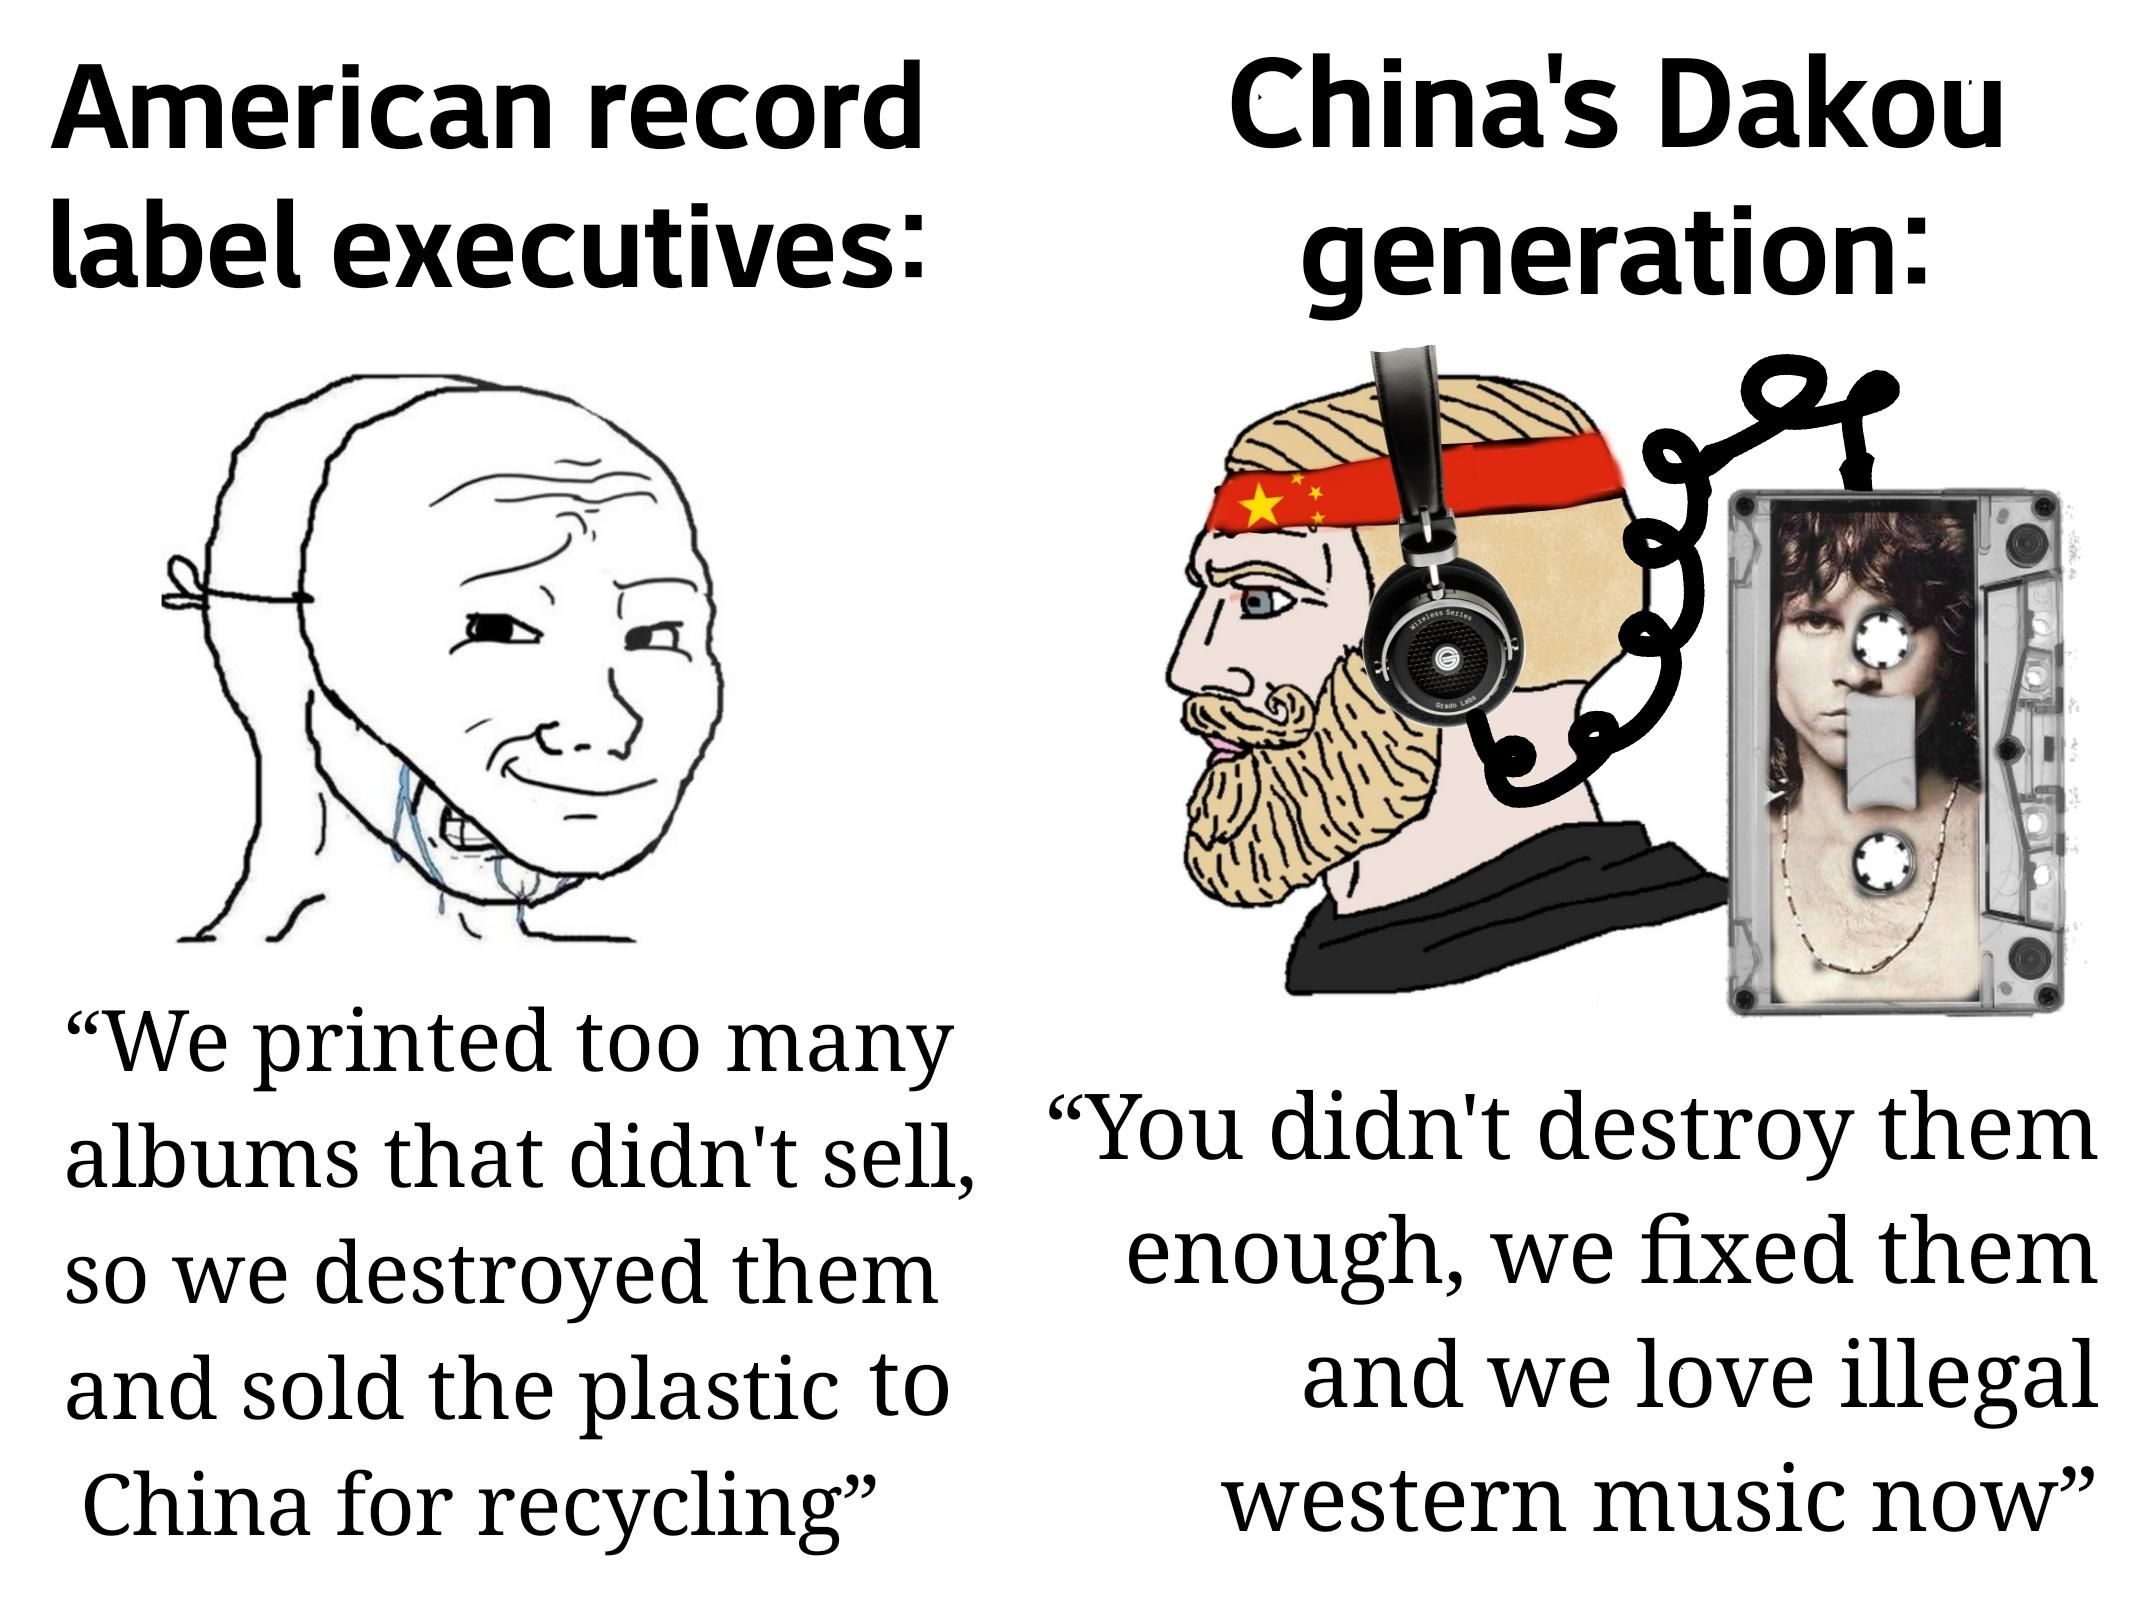 In the 1980s, China's Communist party had banned most western music. In the 1990s, the music started getting through in an unexpected way